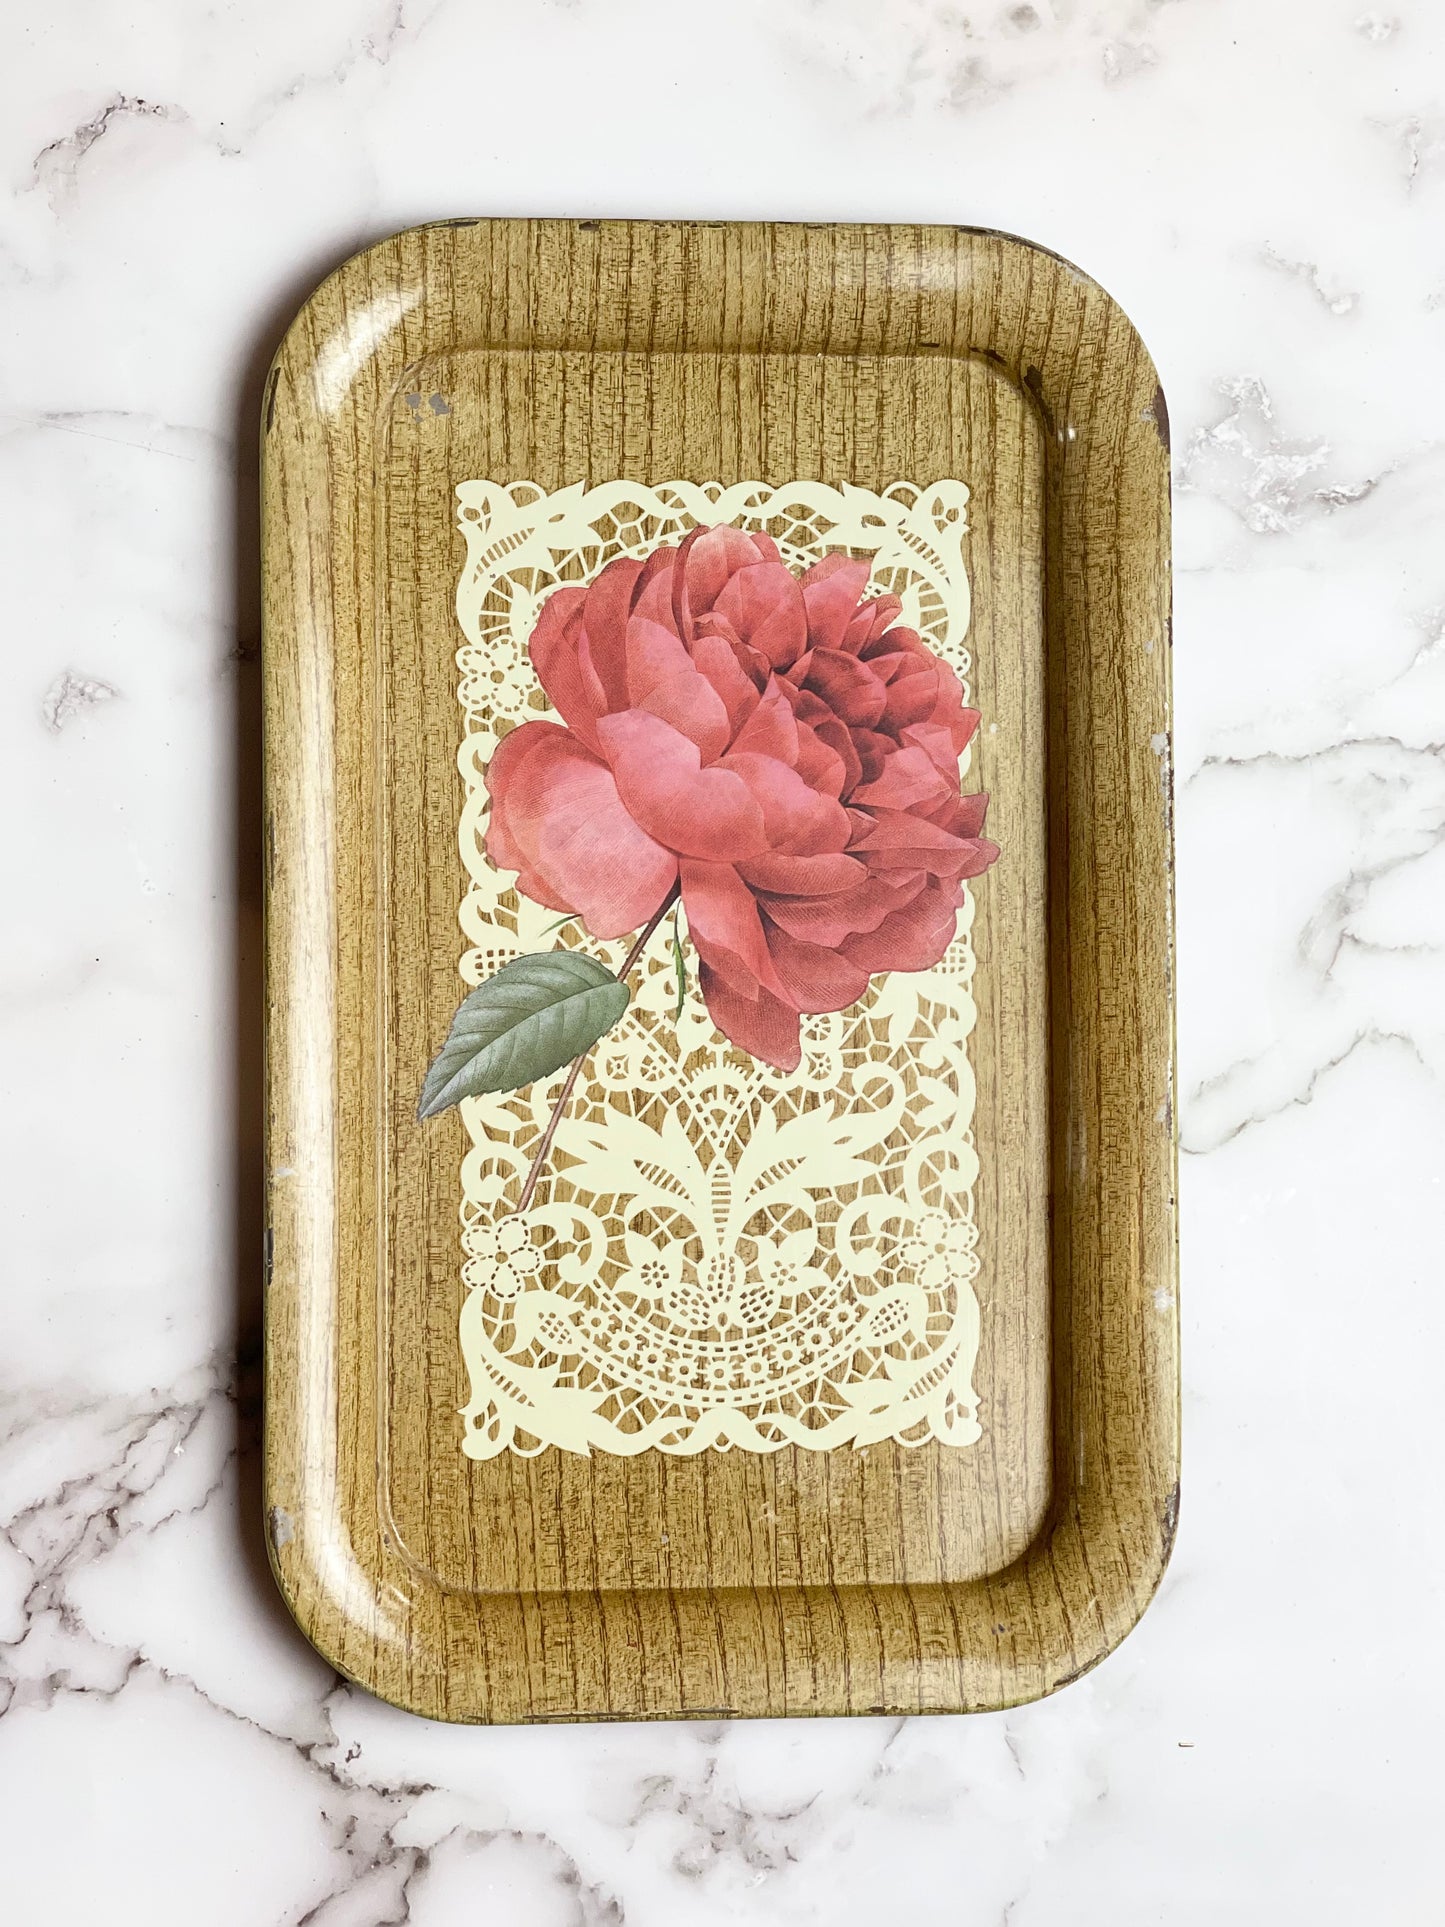 Vintage Metal Tray with red rose